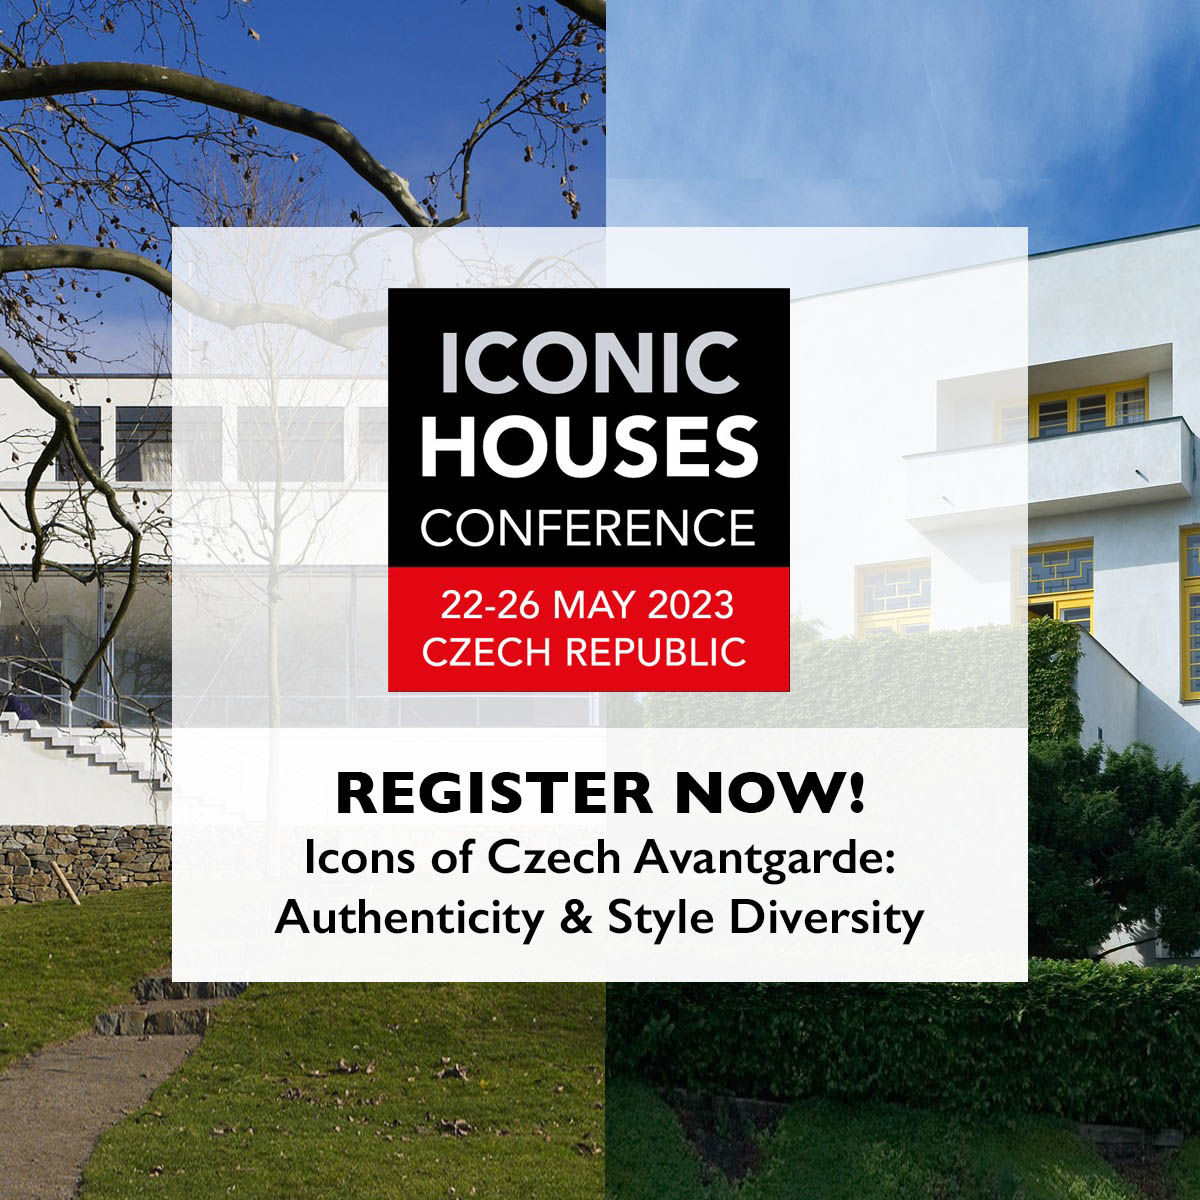 Iconic Houses Conference and House Tours from 22 to 26 May 2023